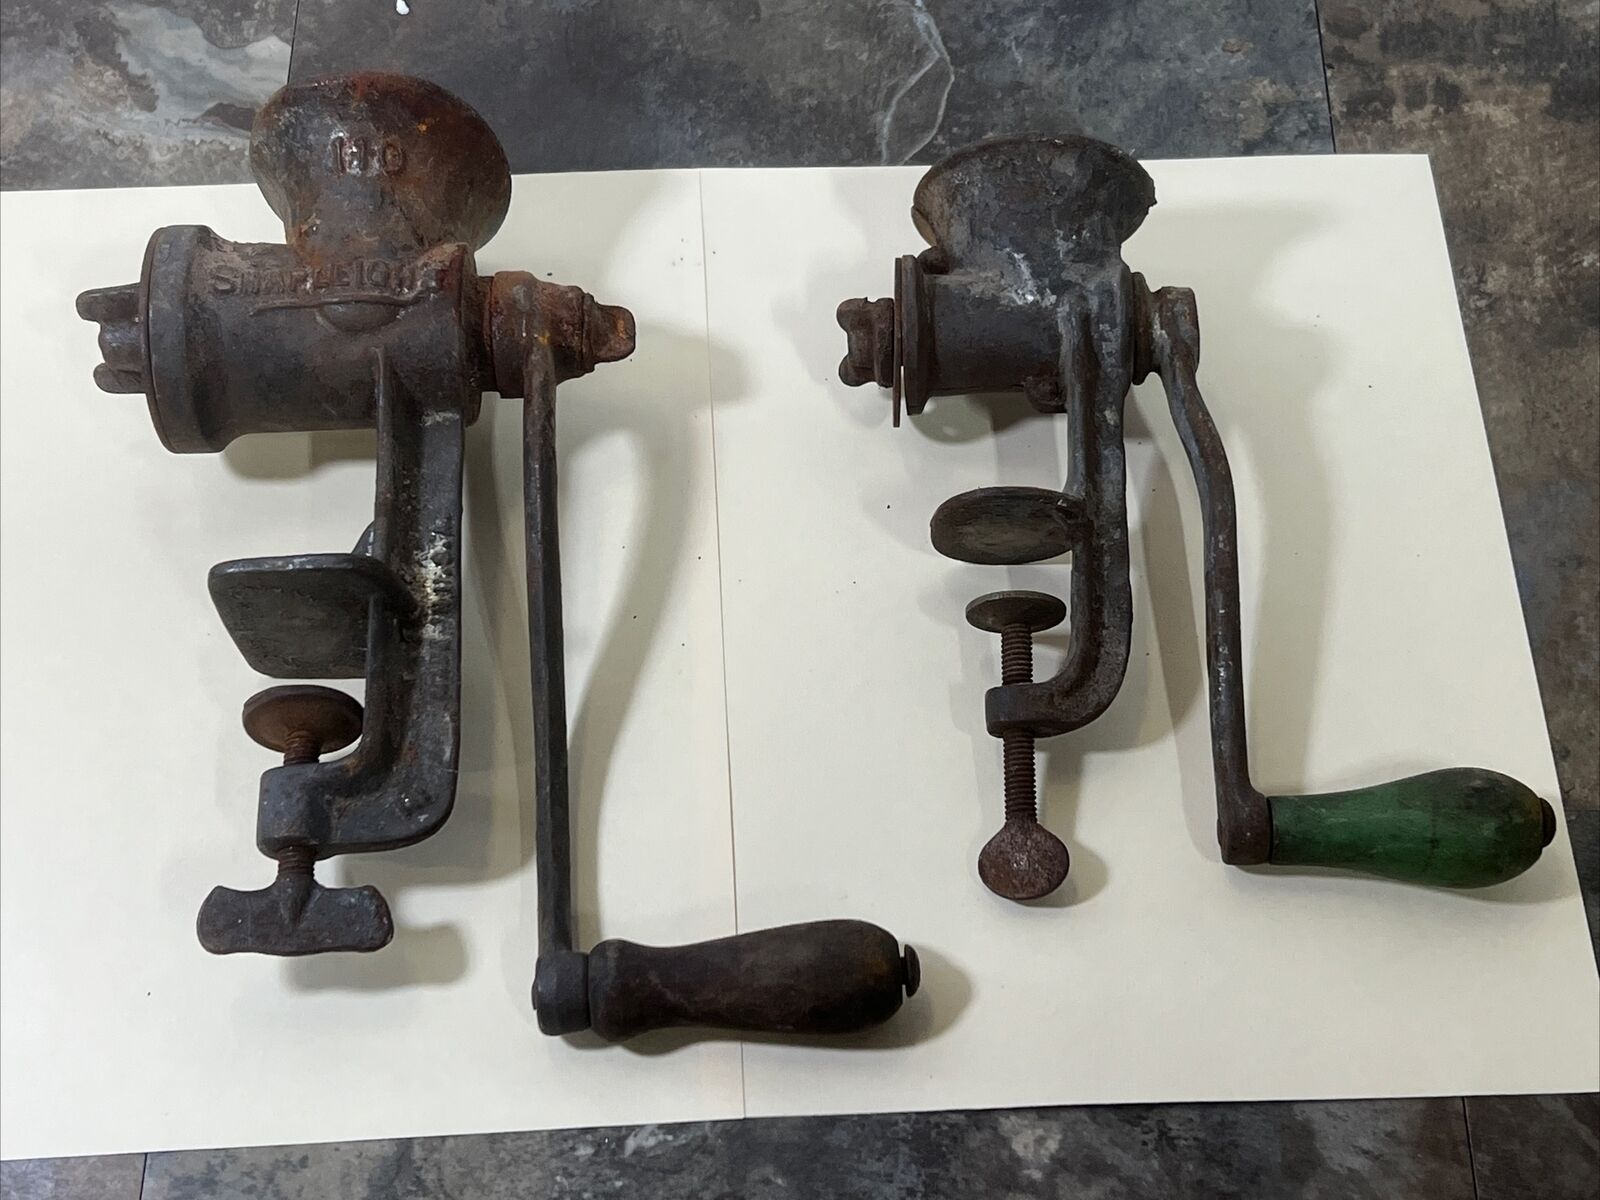 Lot Of 2 Antique Hand Crank Meat Grinders Made in USA- Shapleigh\'s 110 + Vintage